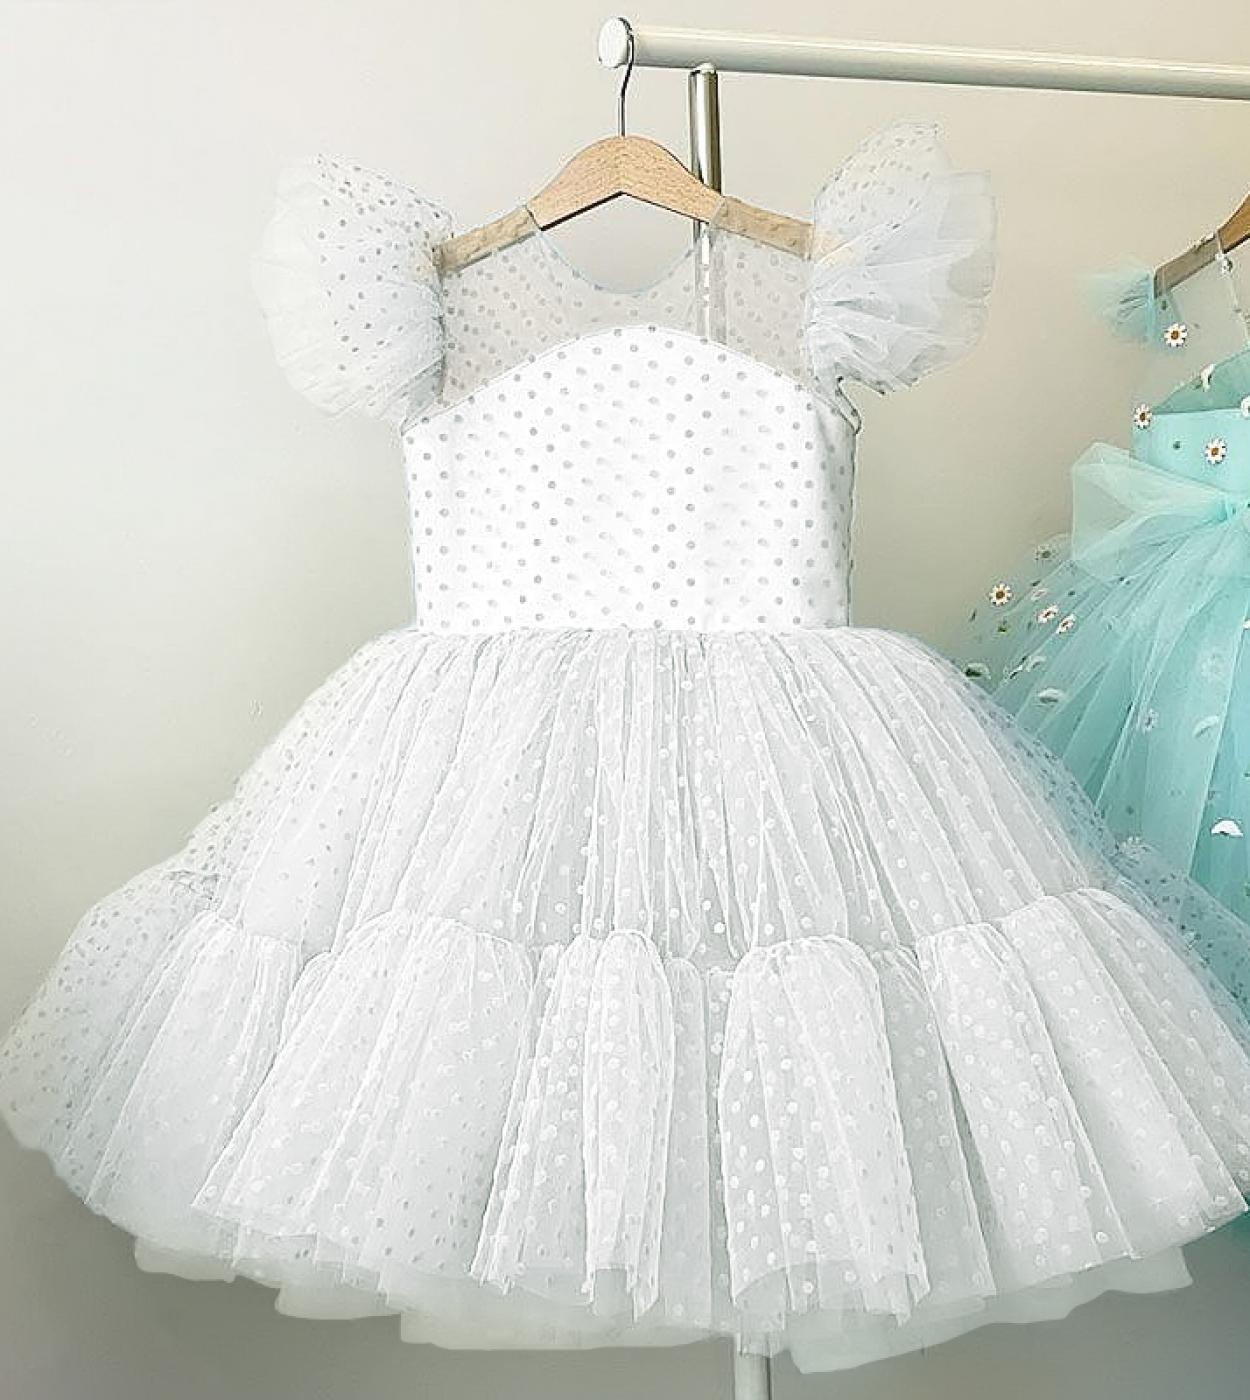 Children Girl Luxury Dress Bridesmaid Dresses 4 10 Yrs Dots White Birthday Party Clothes Gift For Kids Girl Princess Dre